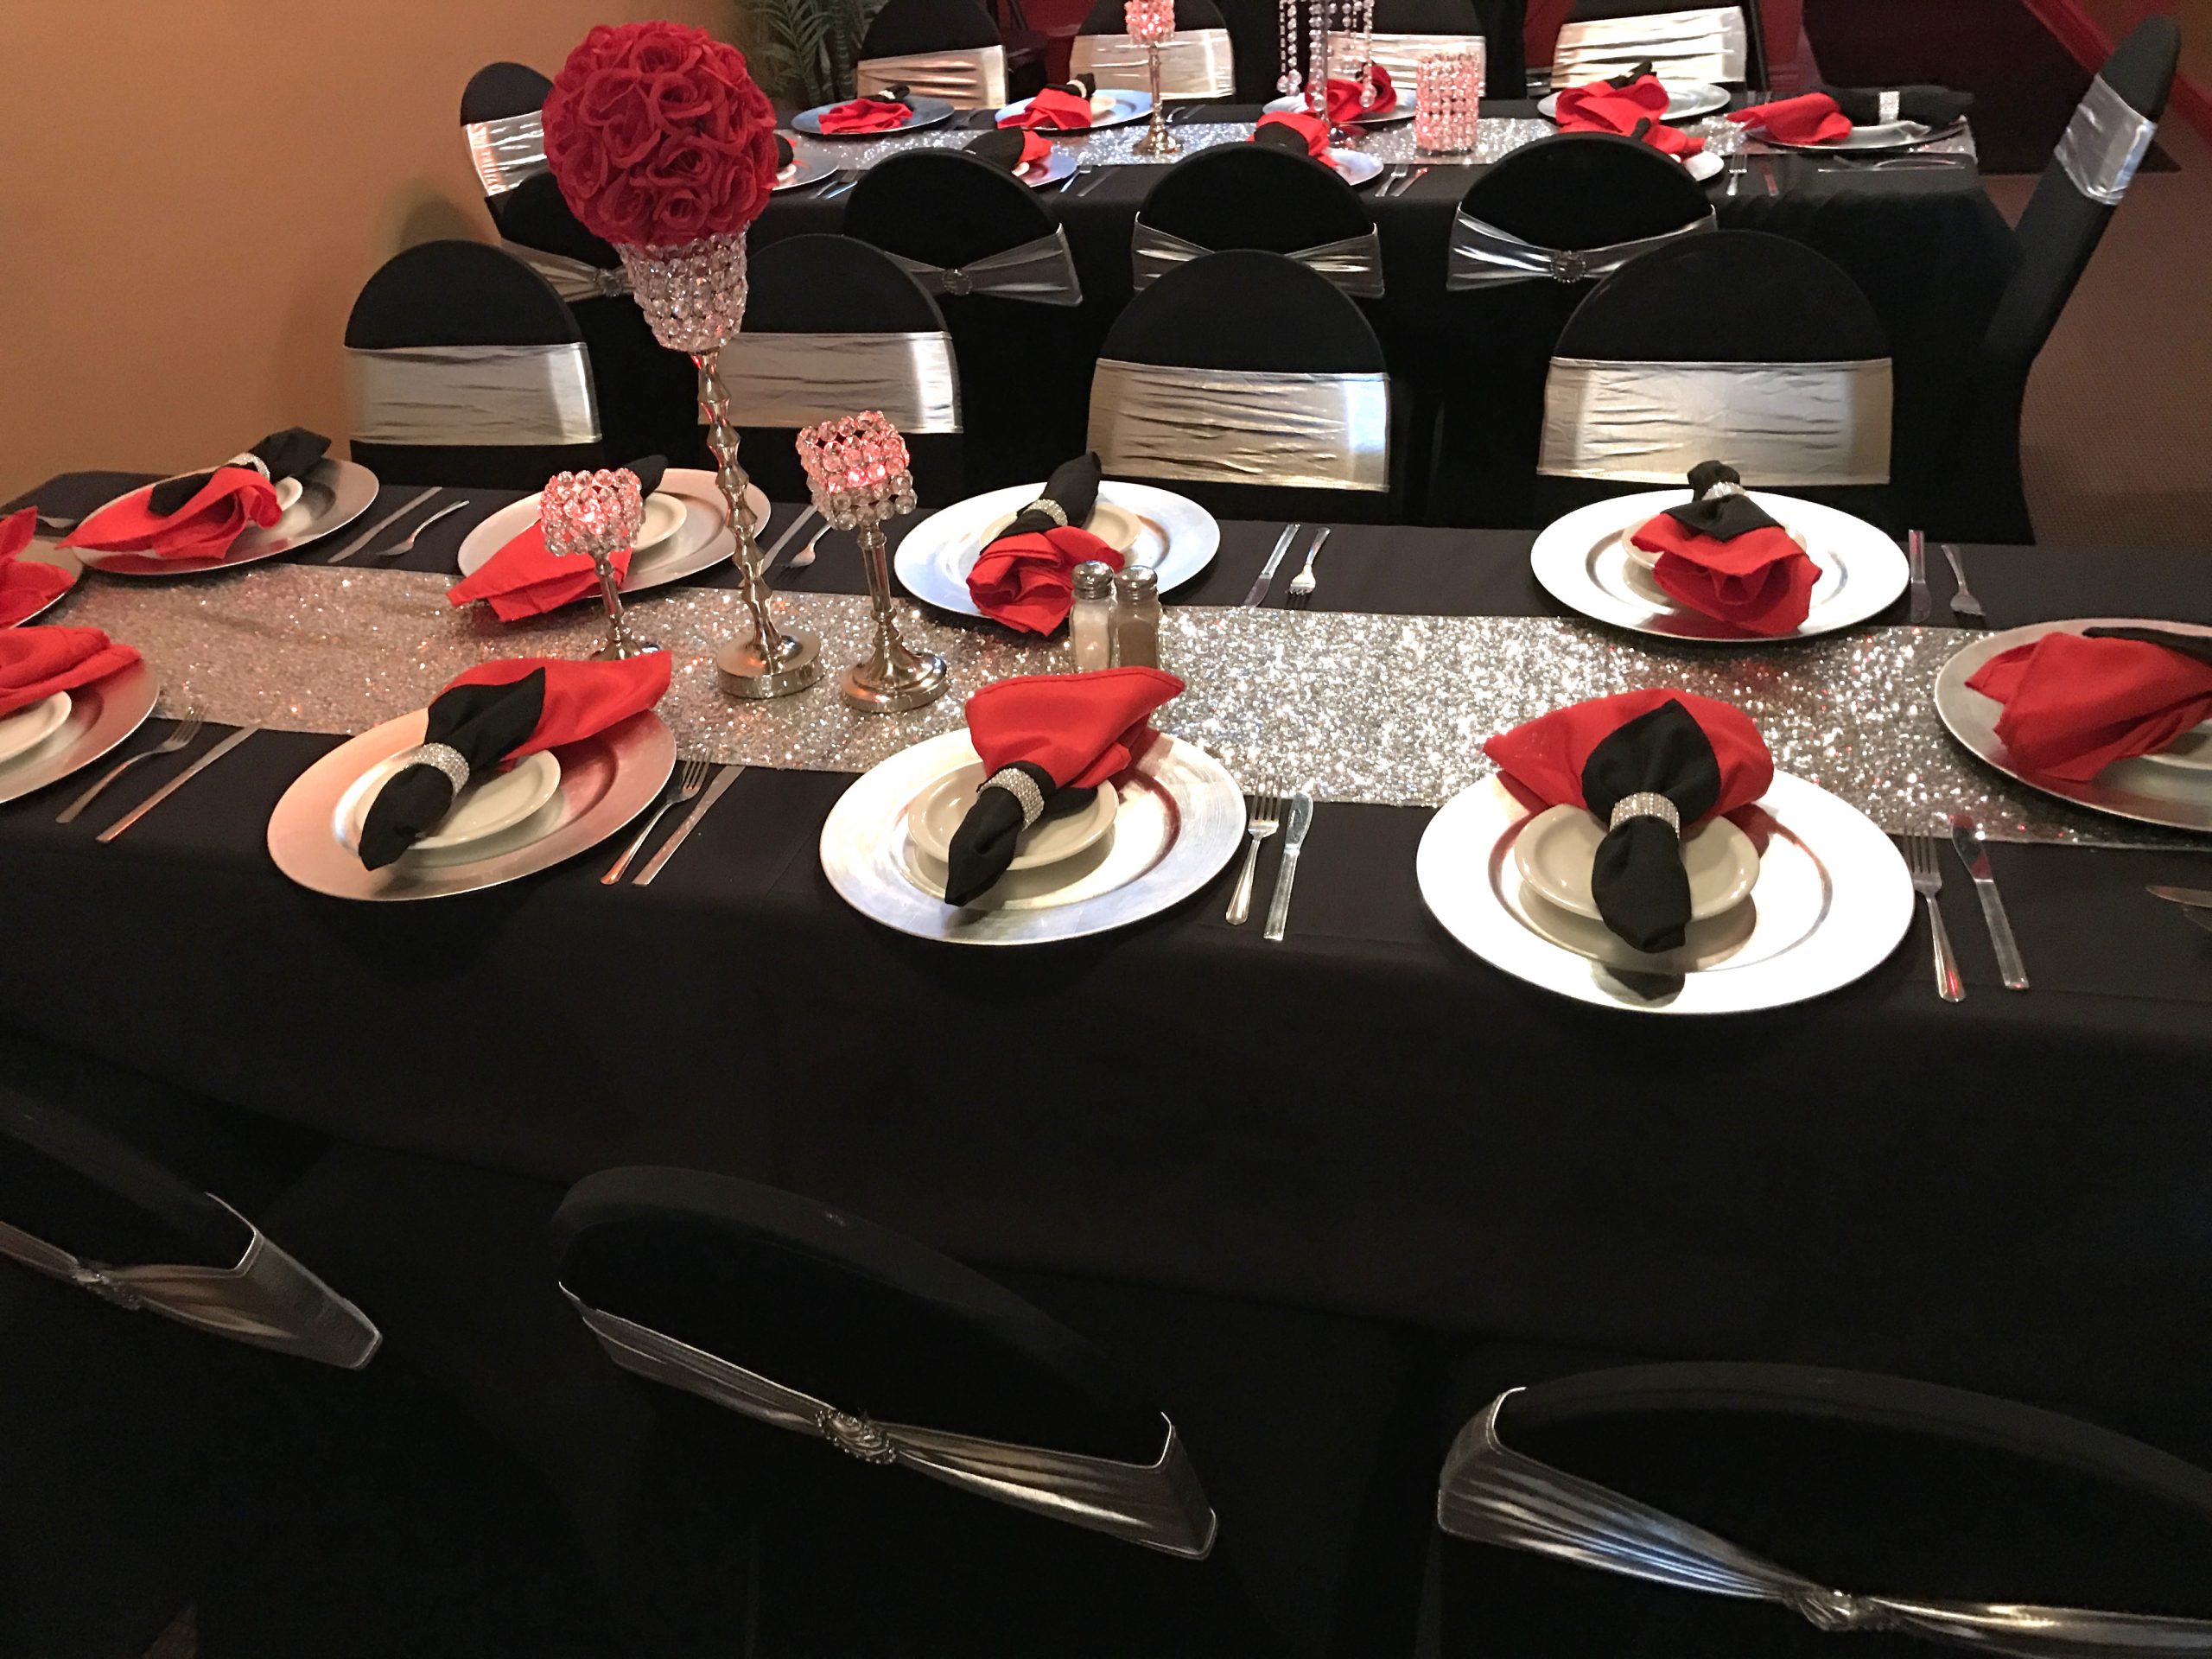 Black, Red and Silver Birthday Setup Birthday Party Ideas